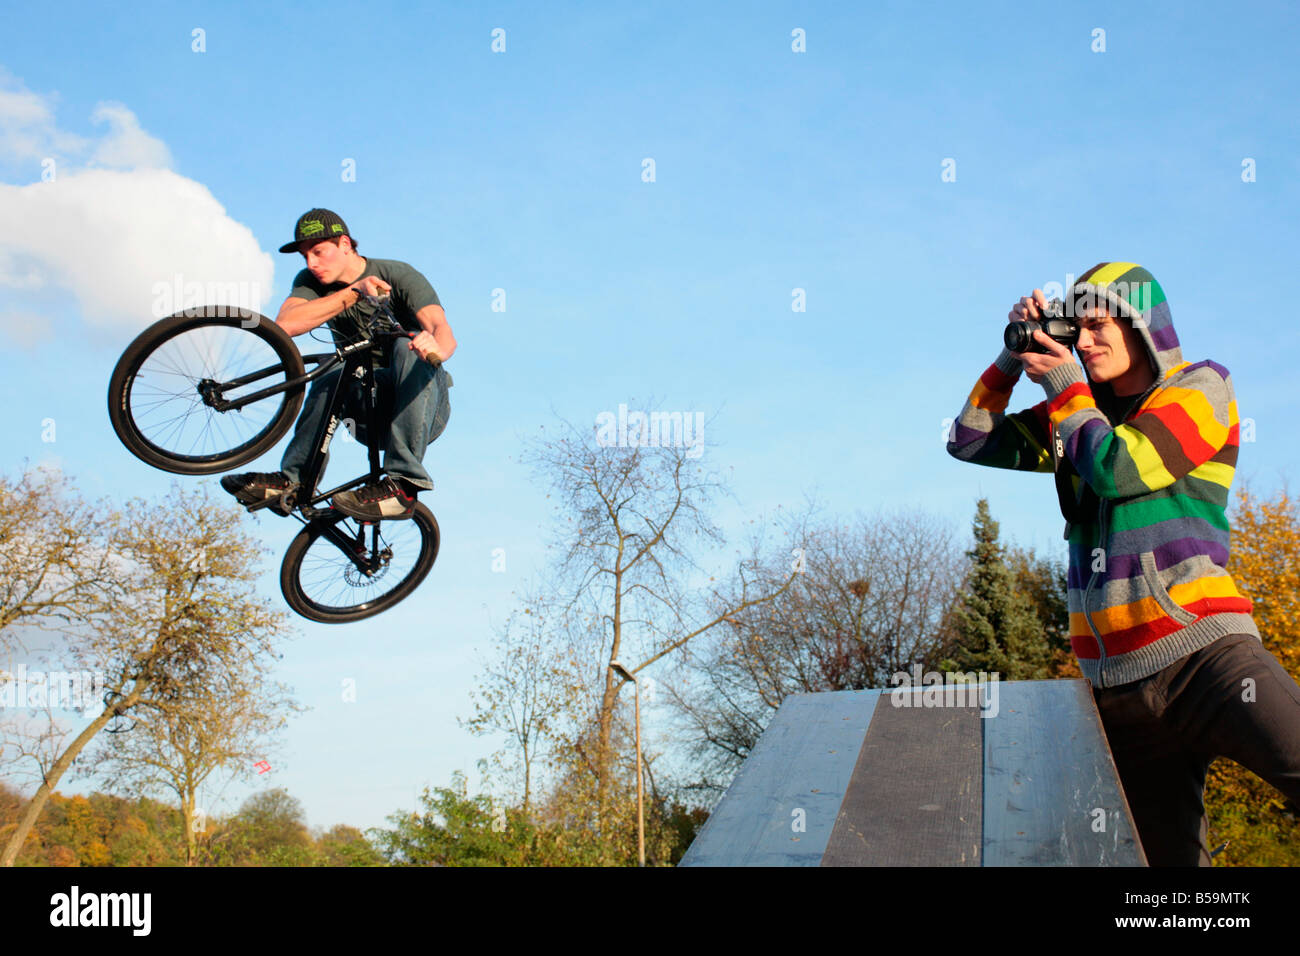 young man jumping with his bicycle while another one is taking photographs Stock Photo